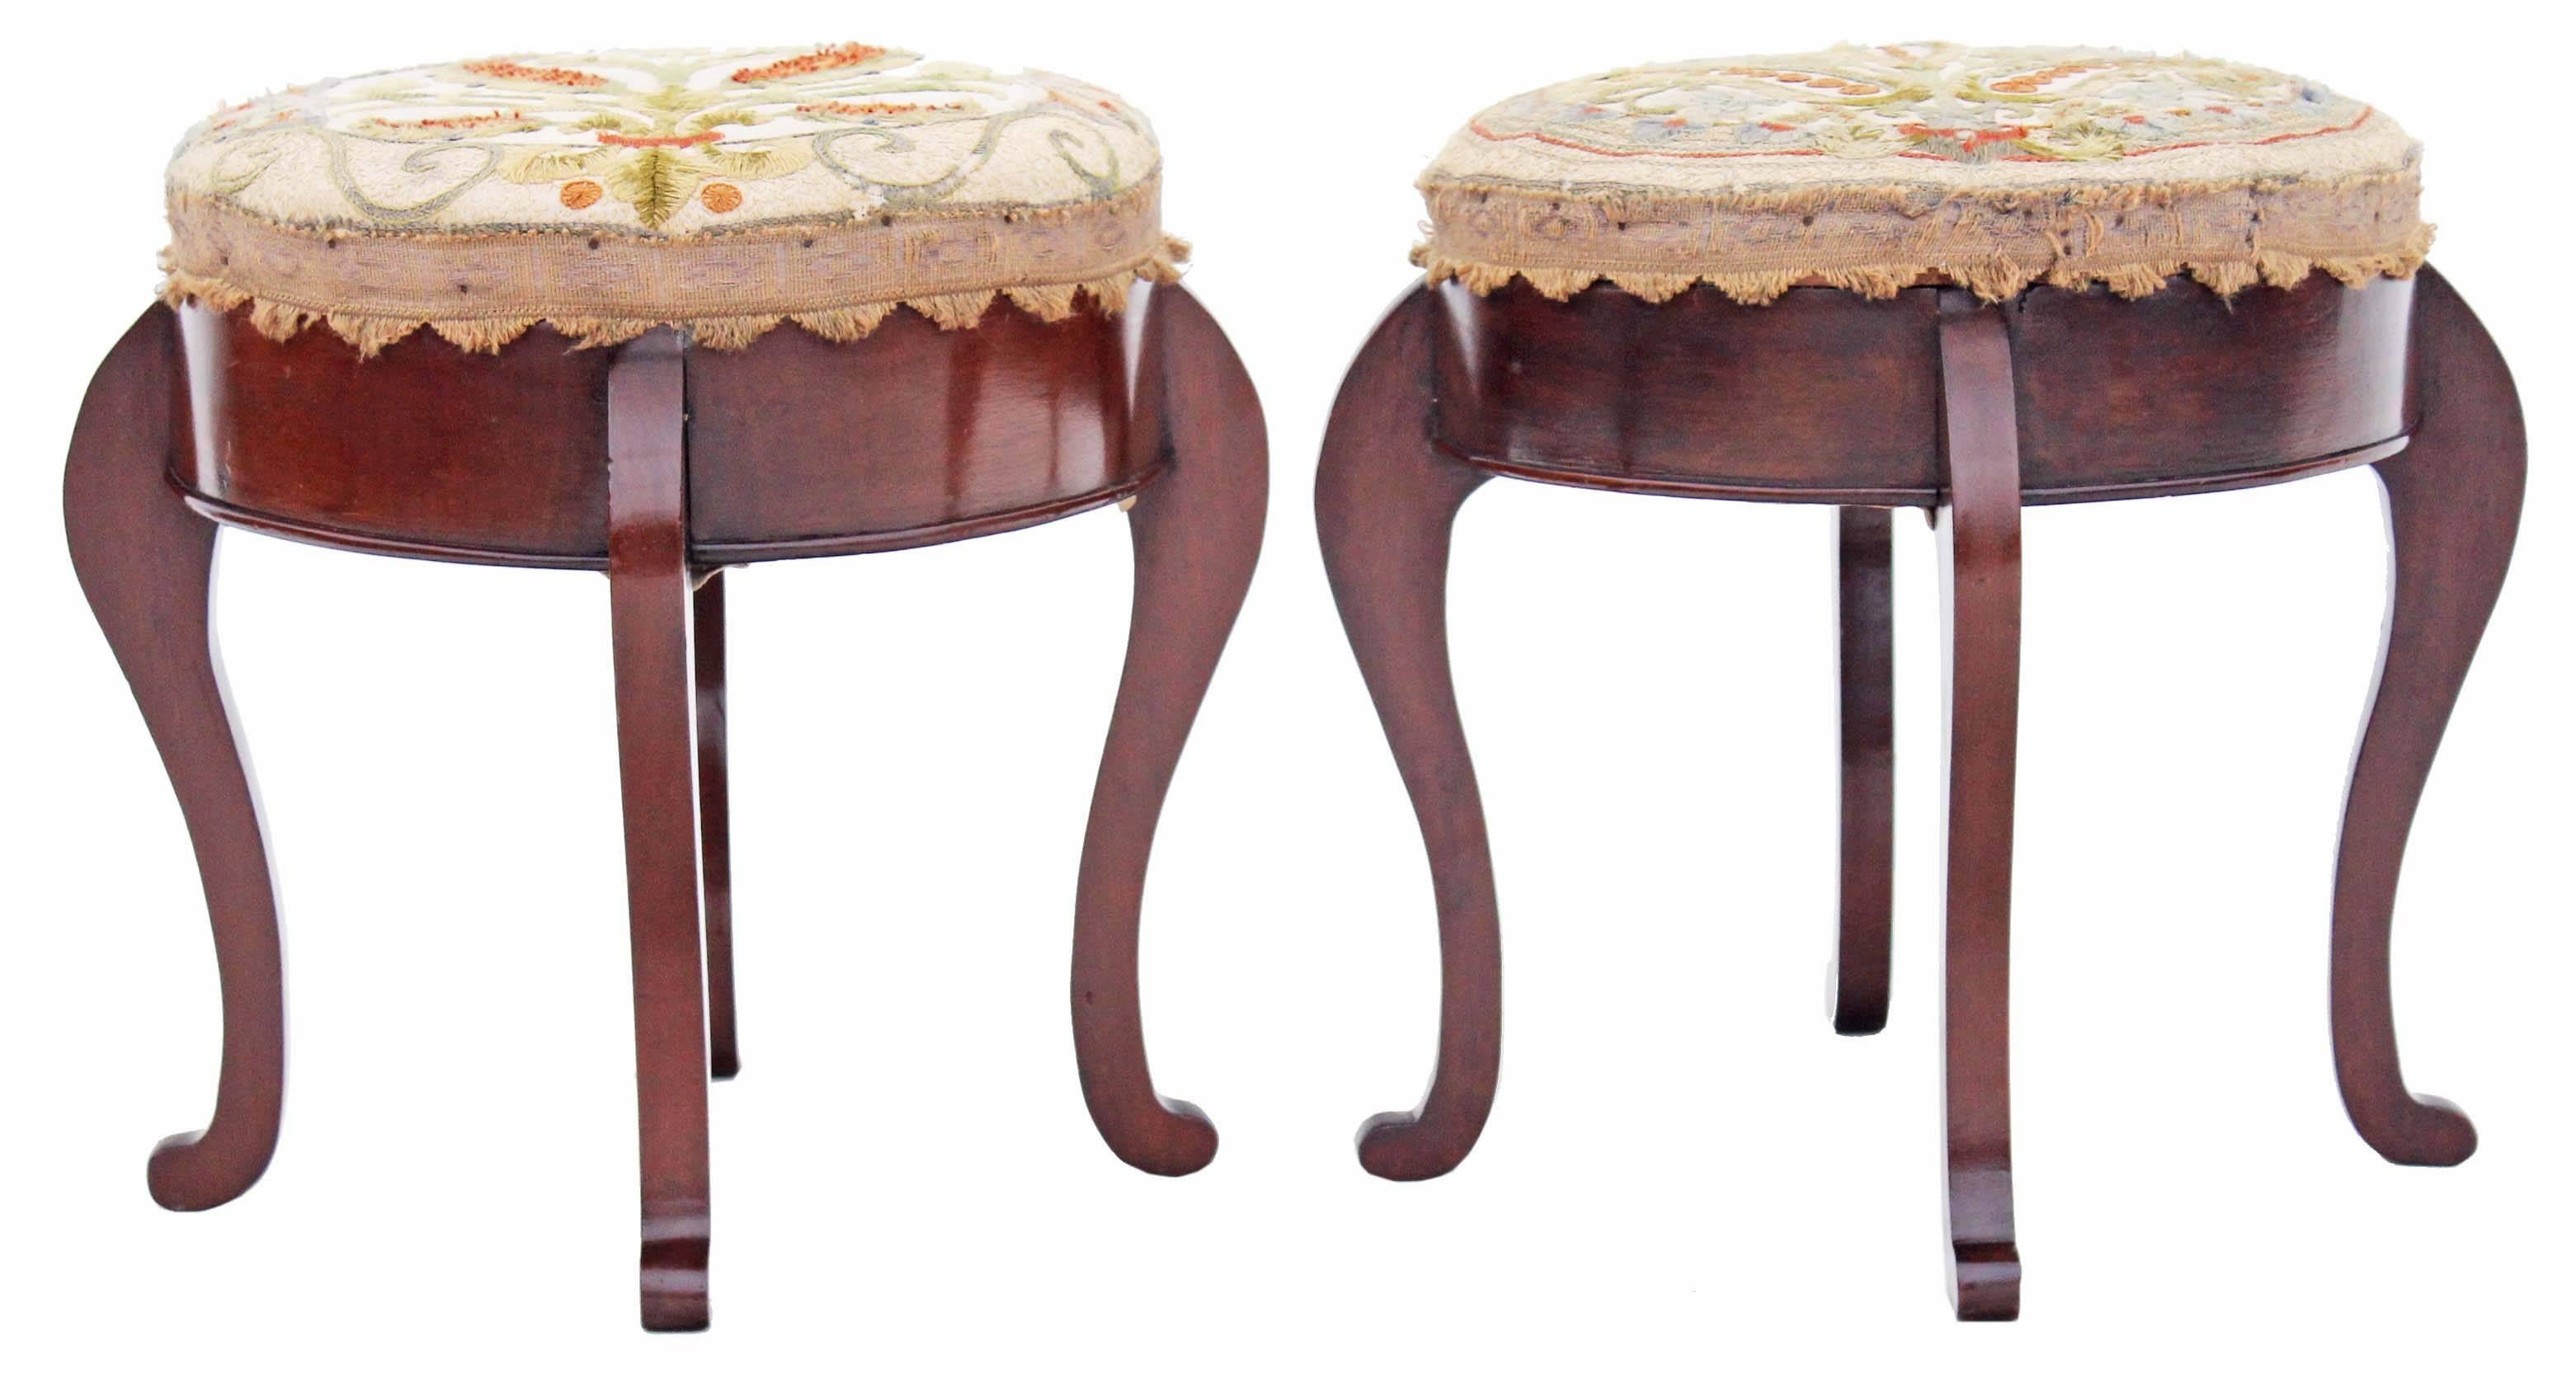 Antique Pair of 19th Century Victorian Foot Stools Embroidered For Sale 2